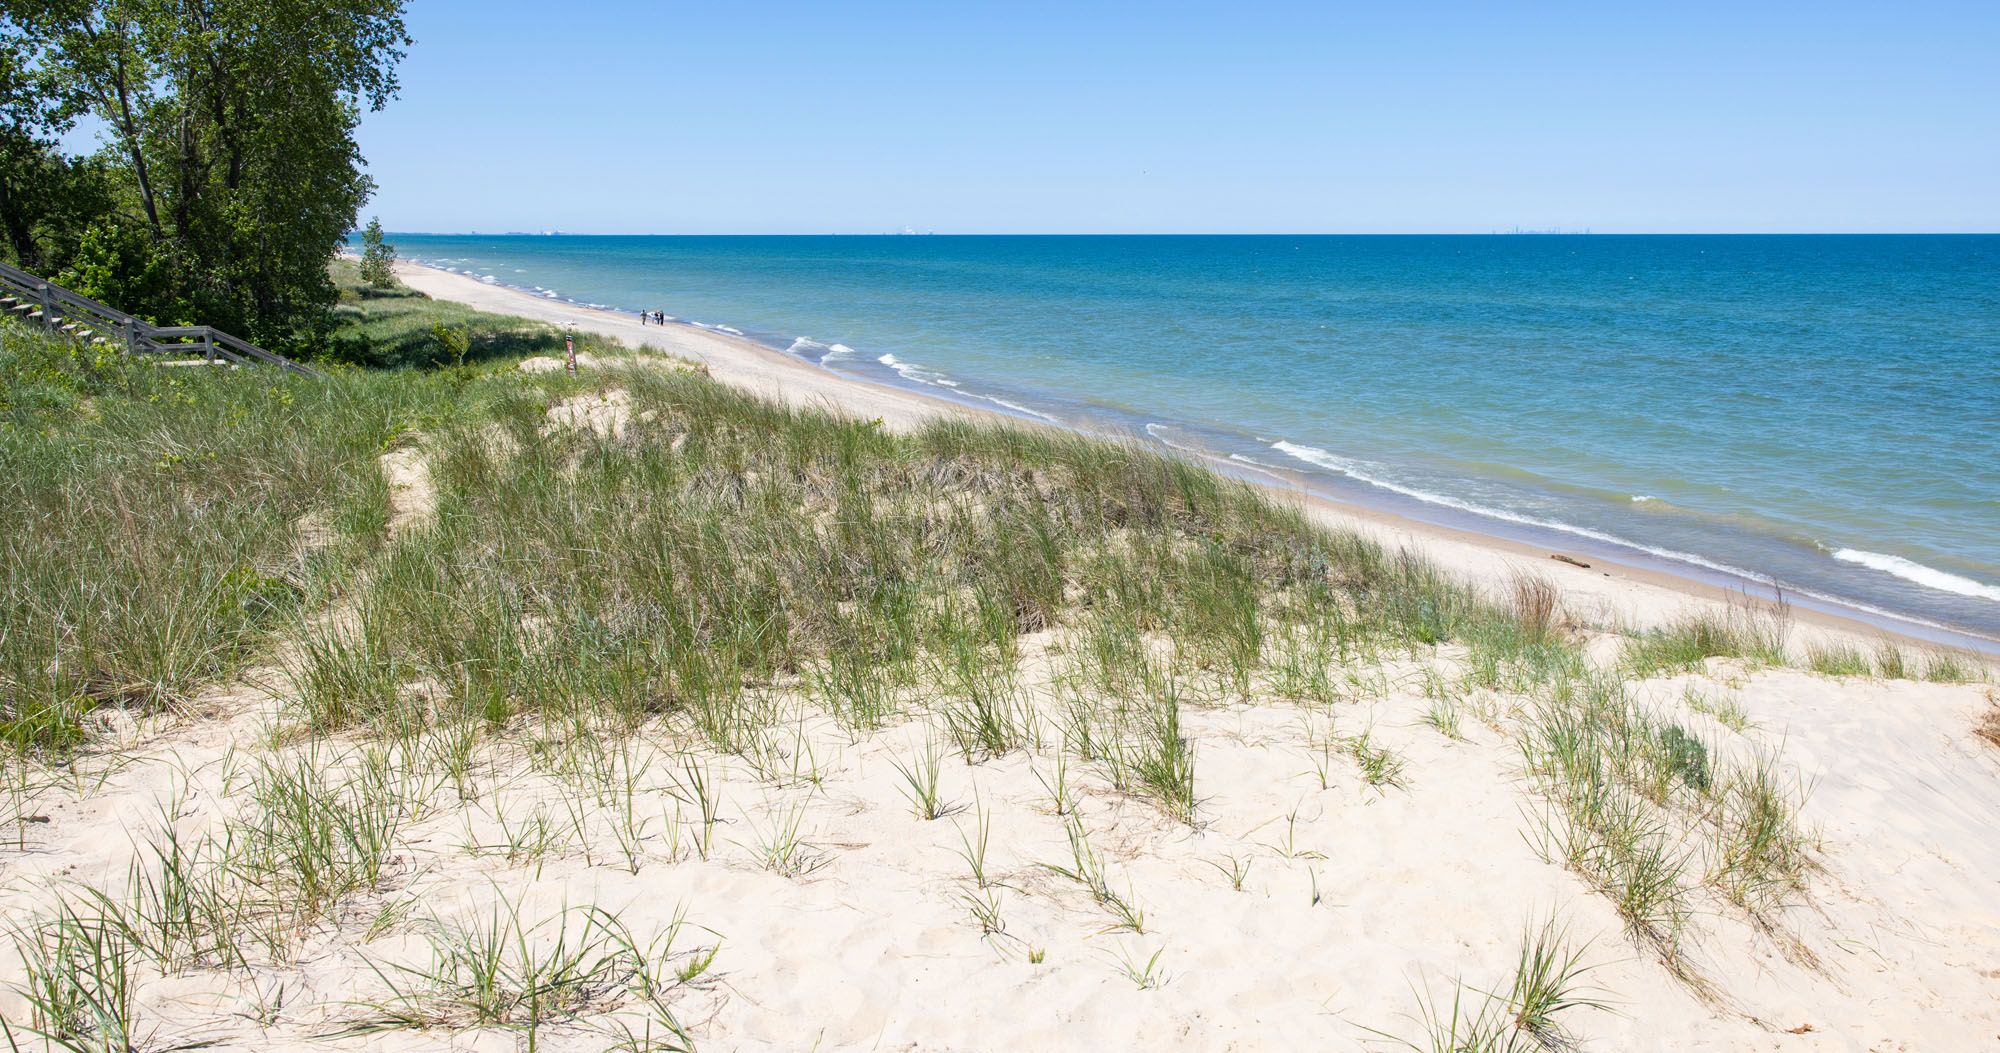 Discover Scenic Beauty: Top 20 Day Trips from Chicago - Activities and Wildlife at Indiana Dunes National Park